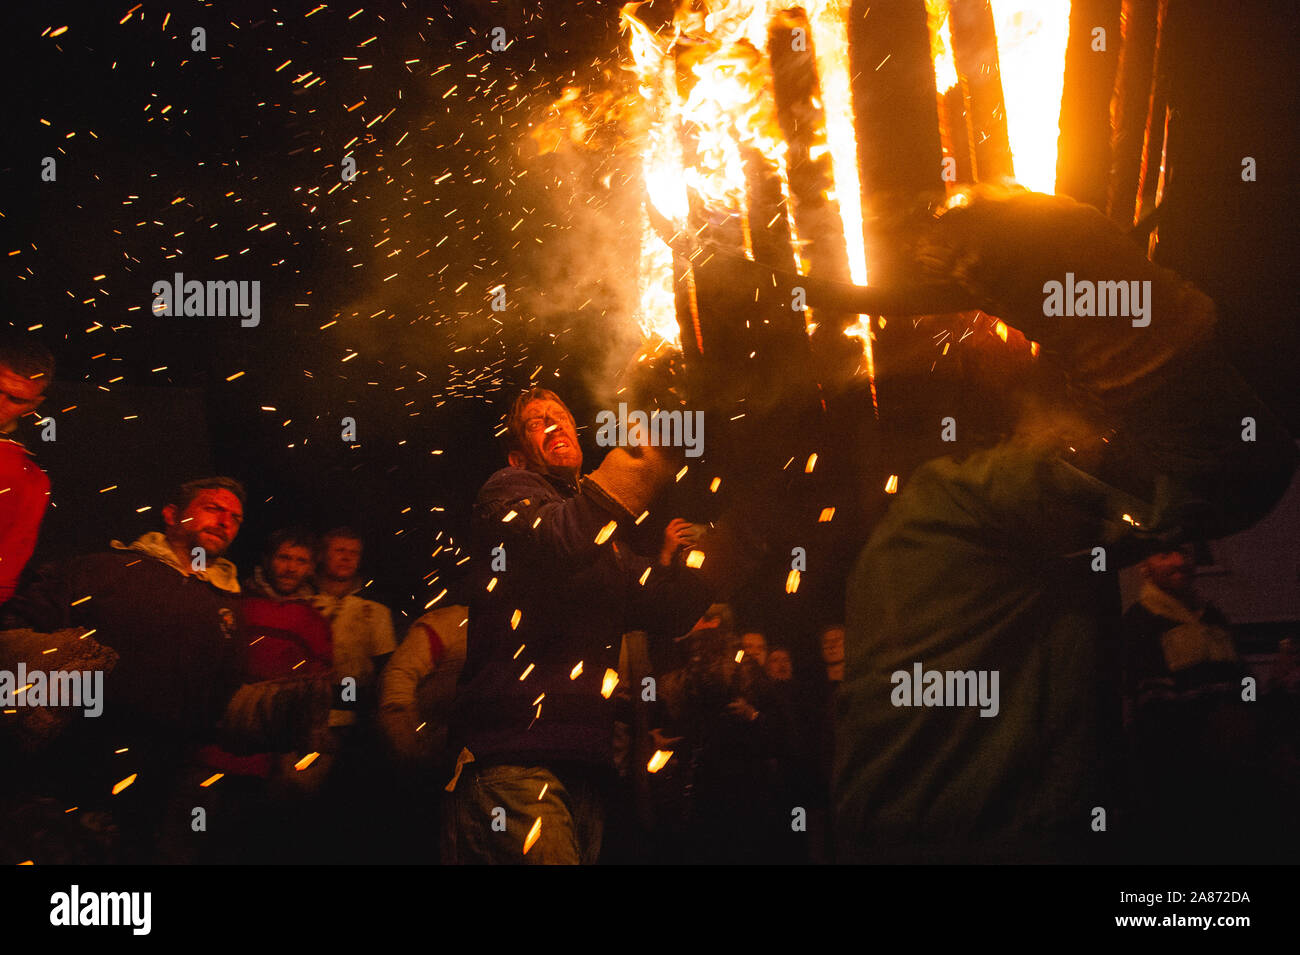 Ottery St Mary, UK, 5th Nov 2019, Participants take part in the Ottery St Mary Tar Barrels event to celebrate the 5th of November by carrying burning barrels up and down the street. Credit: Guy Peterson/ Alamy Live News Stock Photo